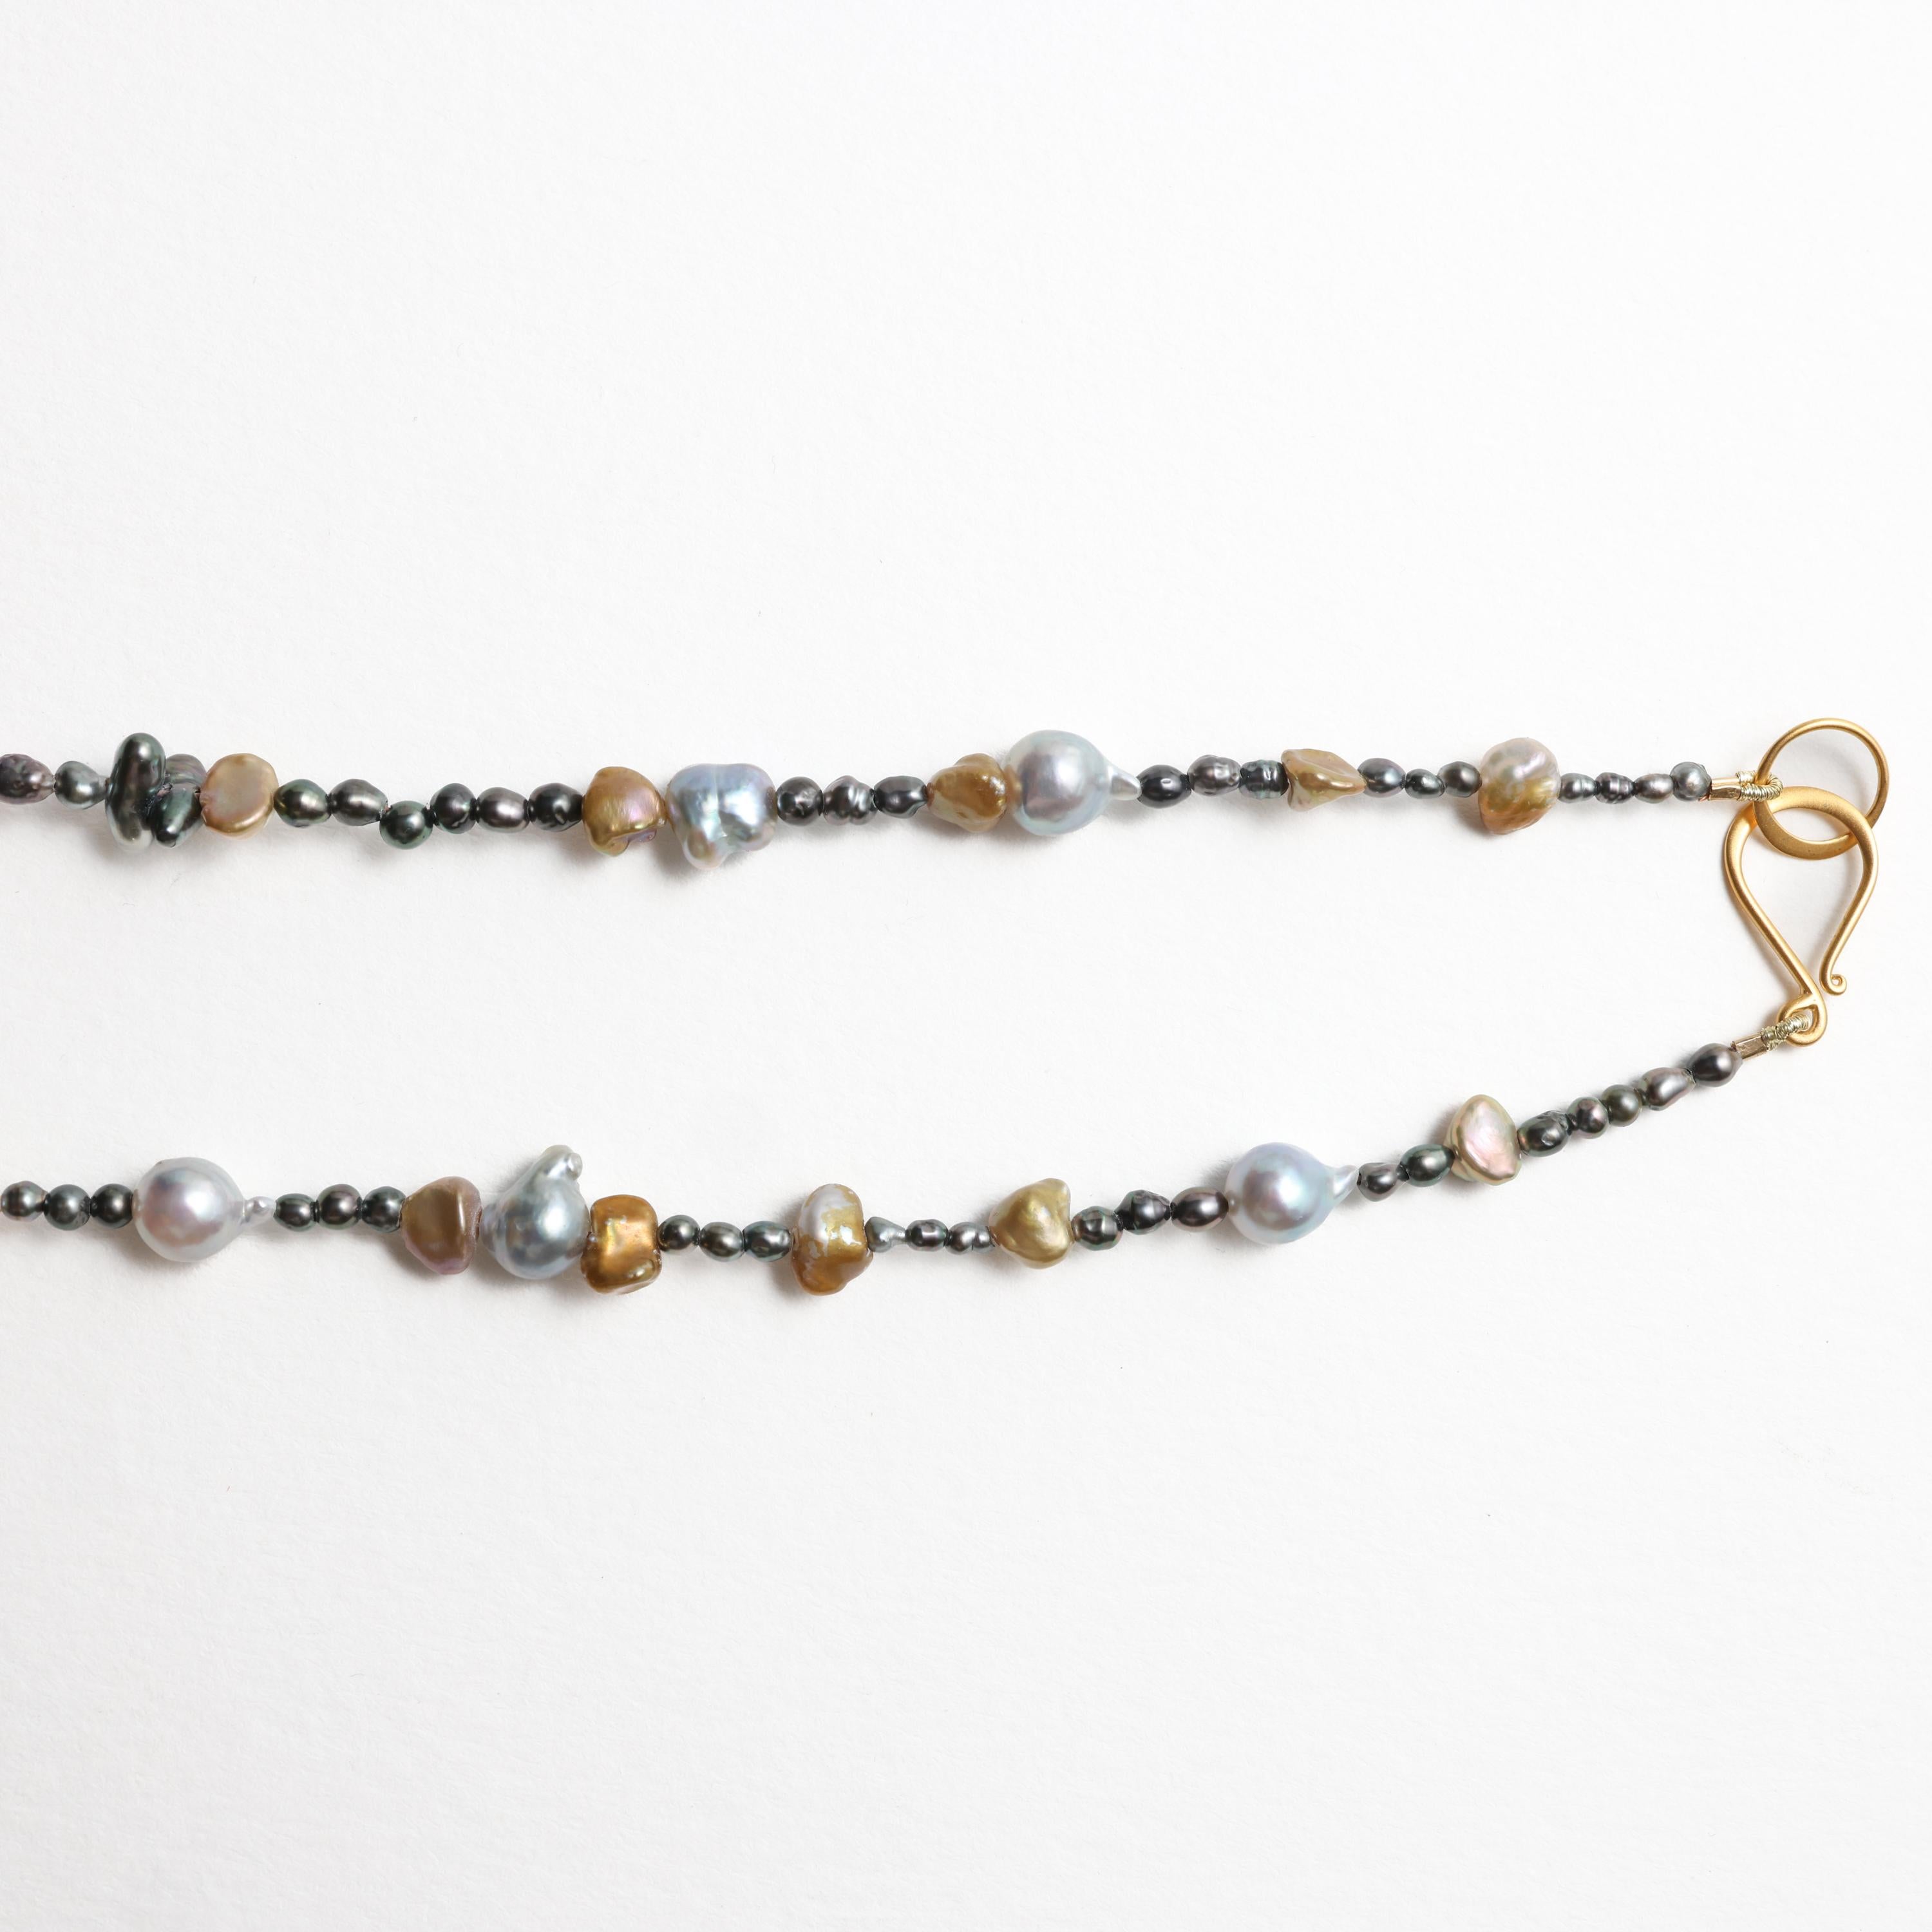 Women's or Men's Pearl and Gemstone Necklace 36